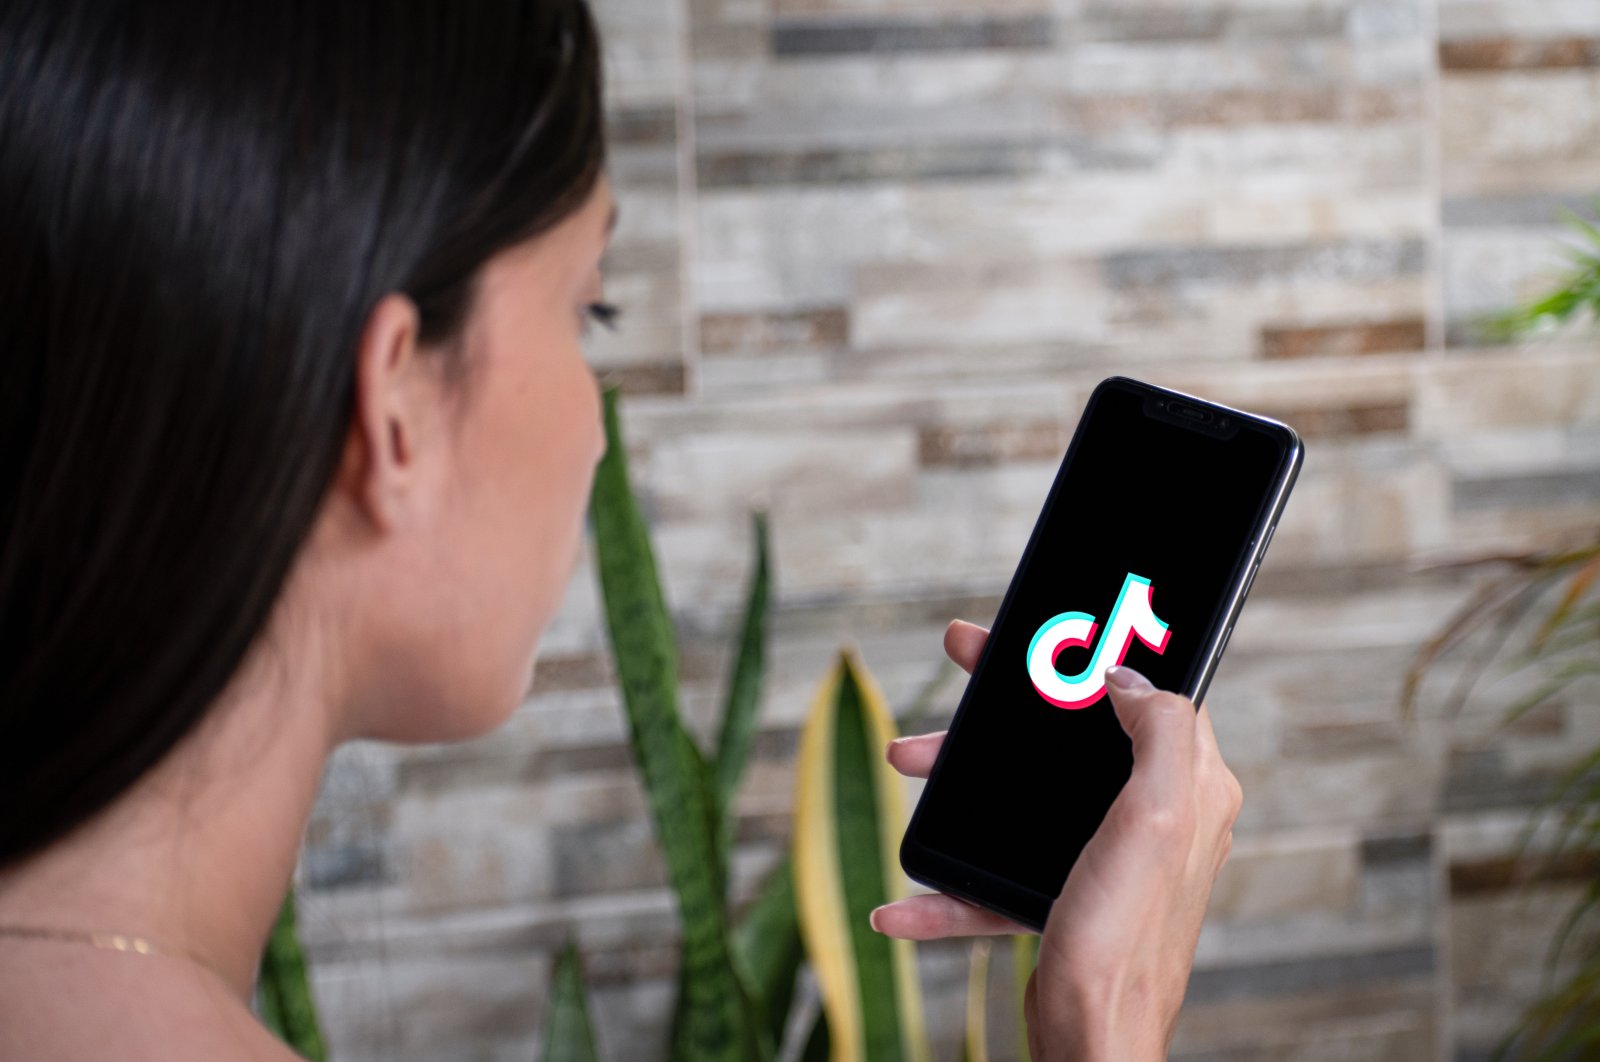 The U.S. Senate passes legislation that would force ByteDance, the China-based parent company of TikTok, to sell the platform within nine months, plus a three-month extension if a sale is in progress, or face being banned in the United States. (Shutterstock Photo)